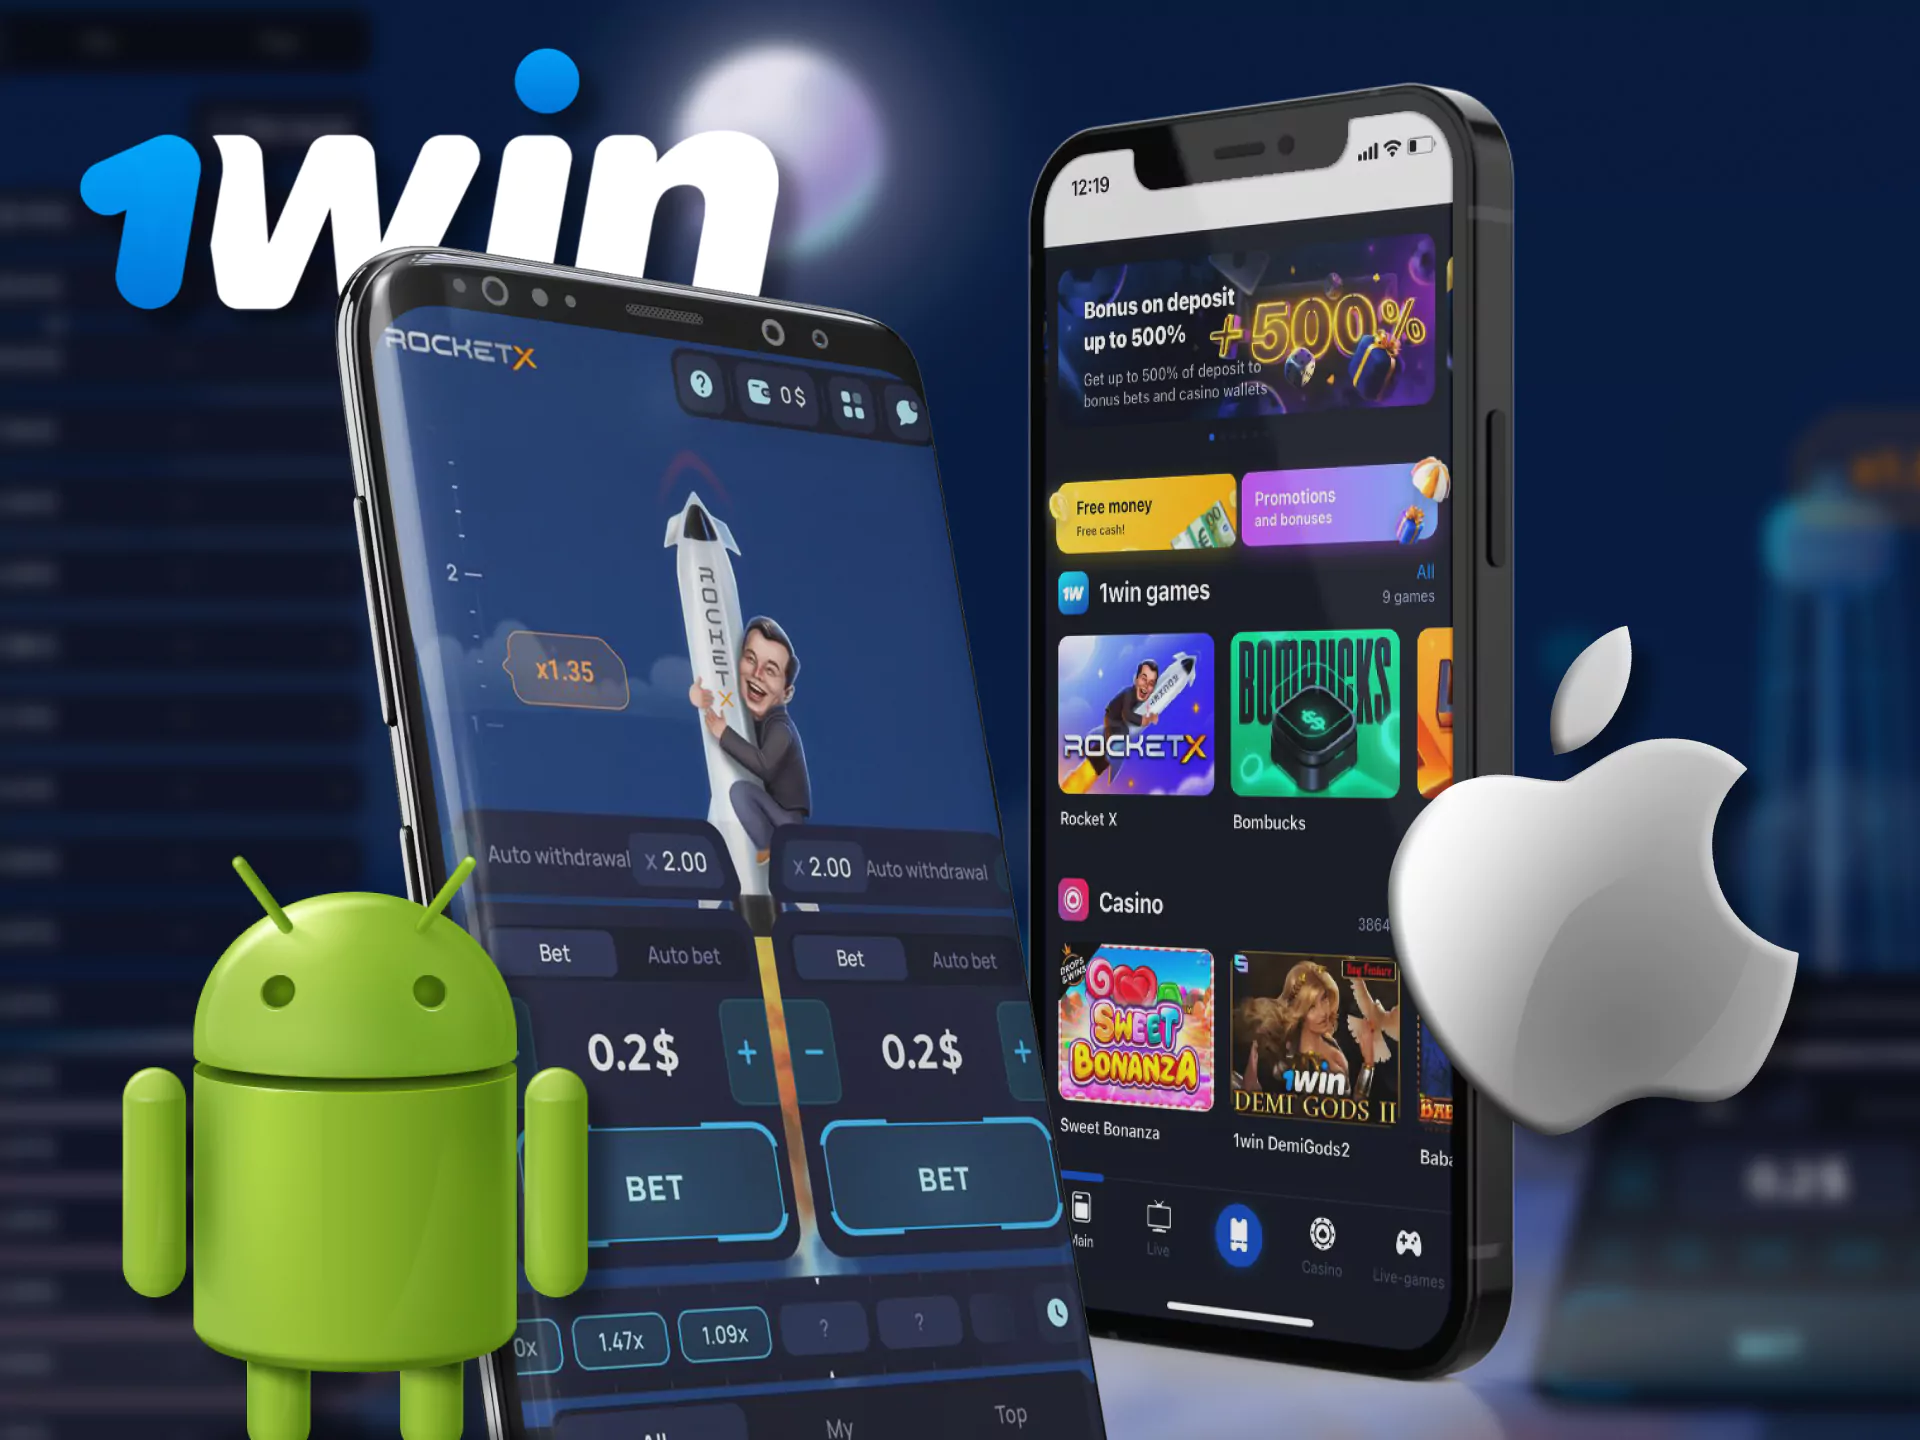 At 1win, use the mobile app to play Rocket X on your phone.